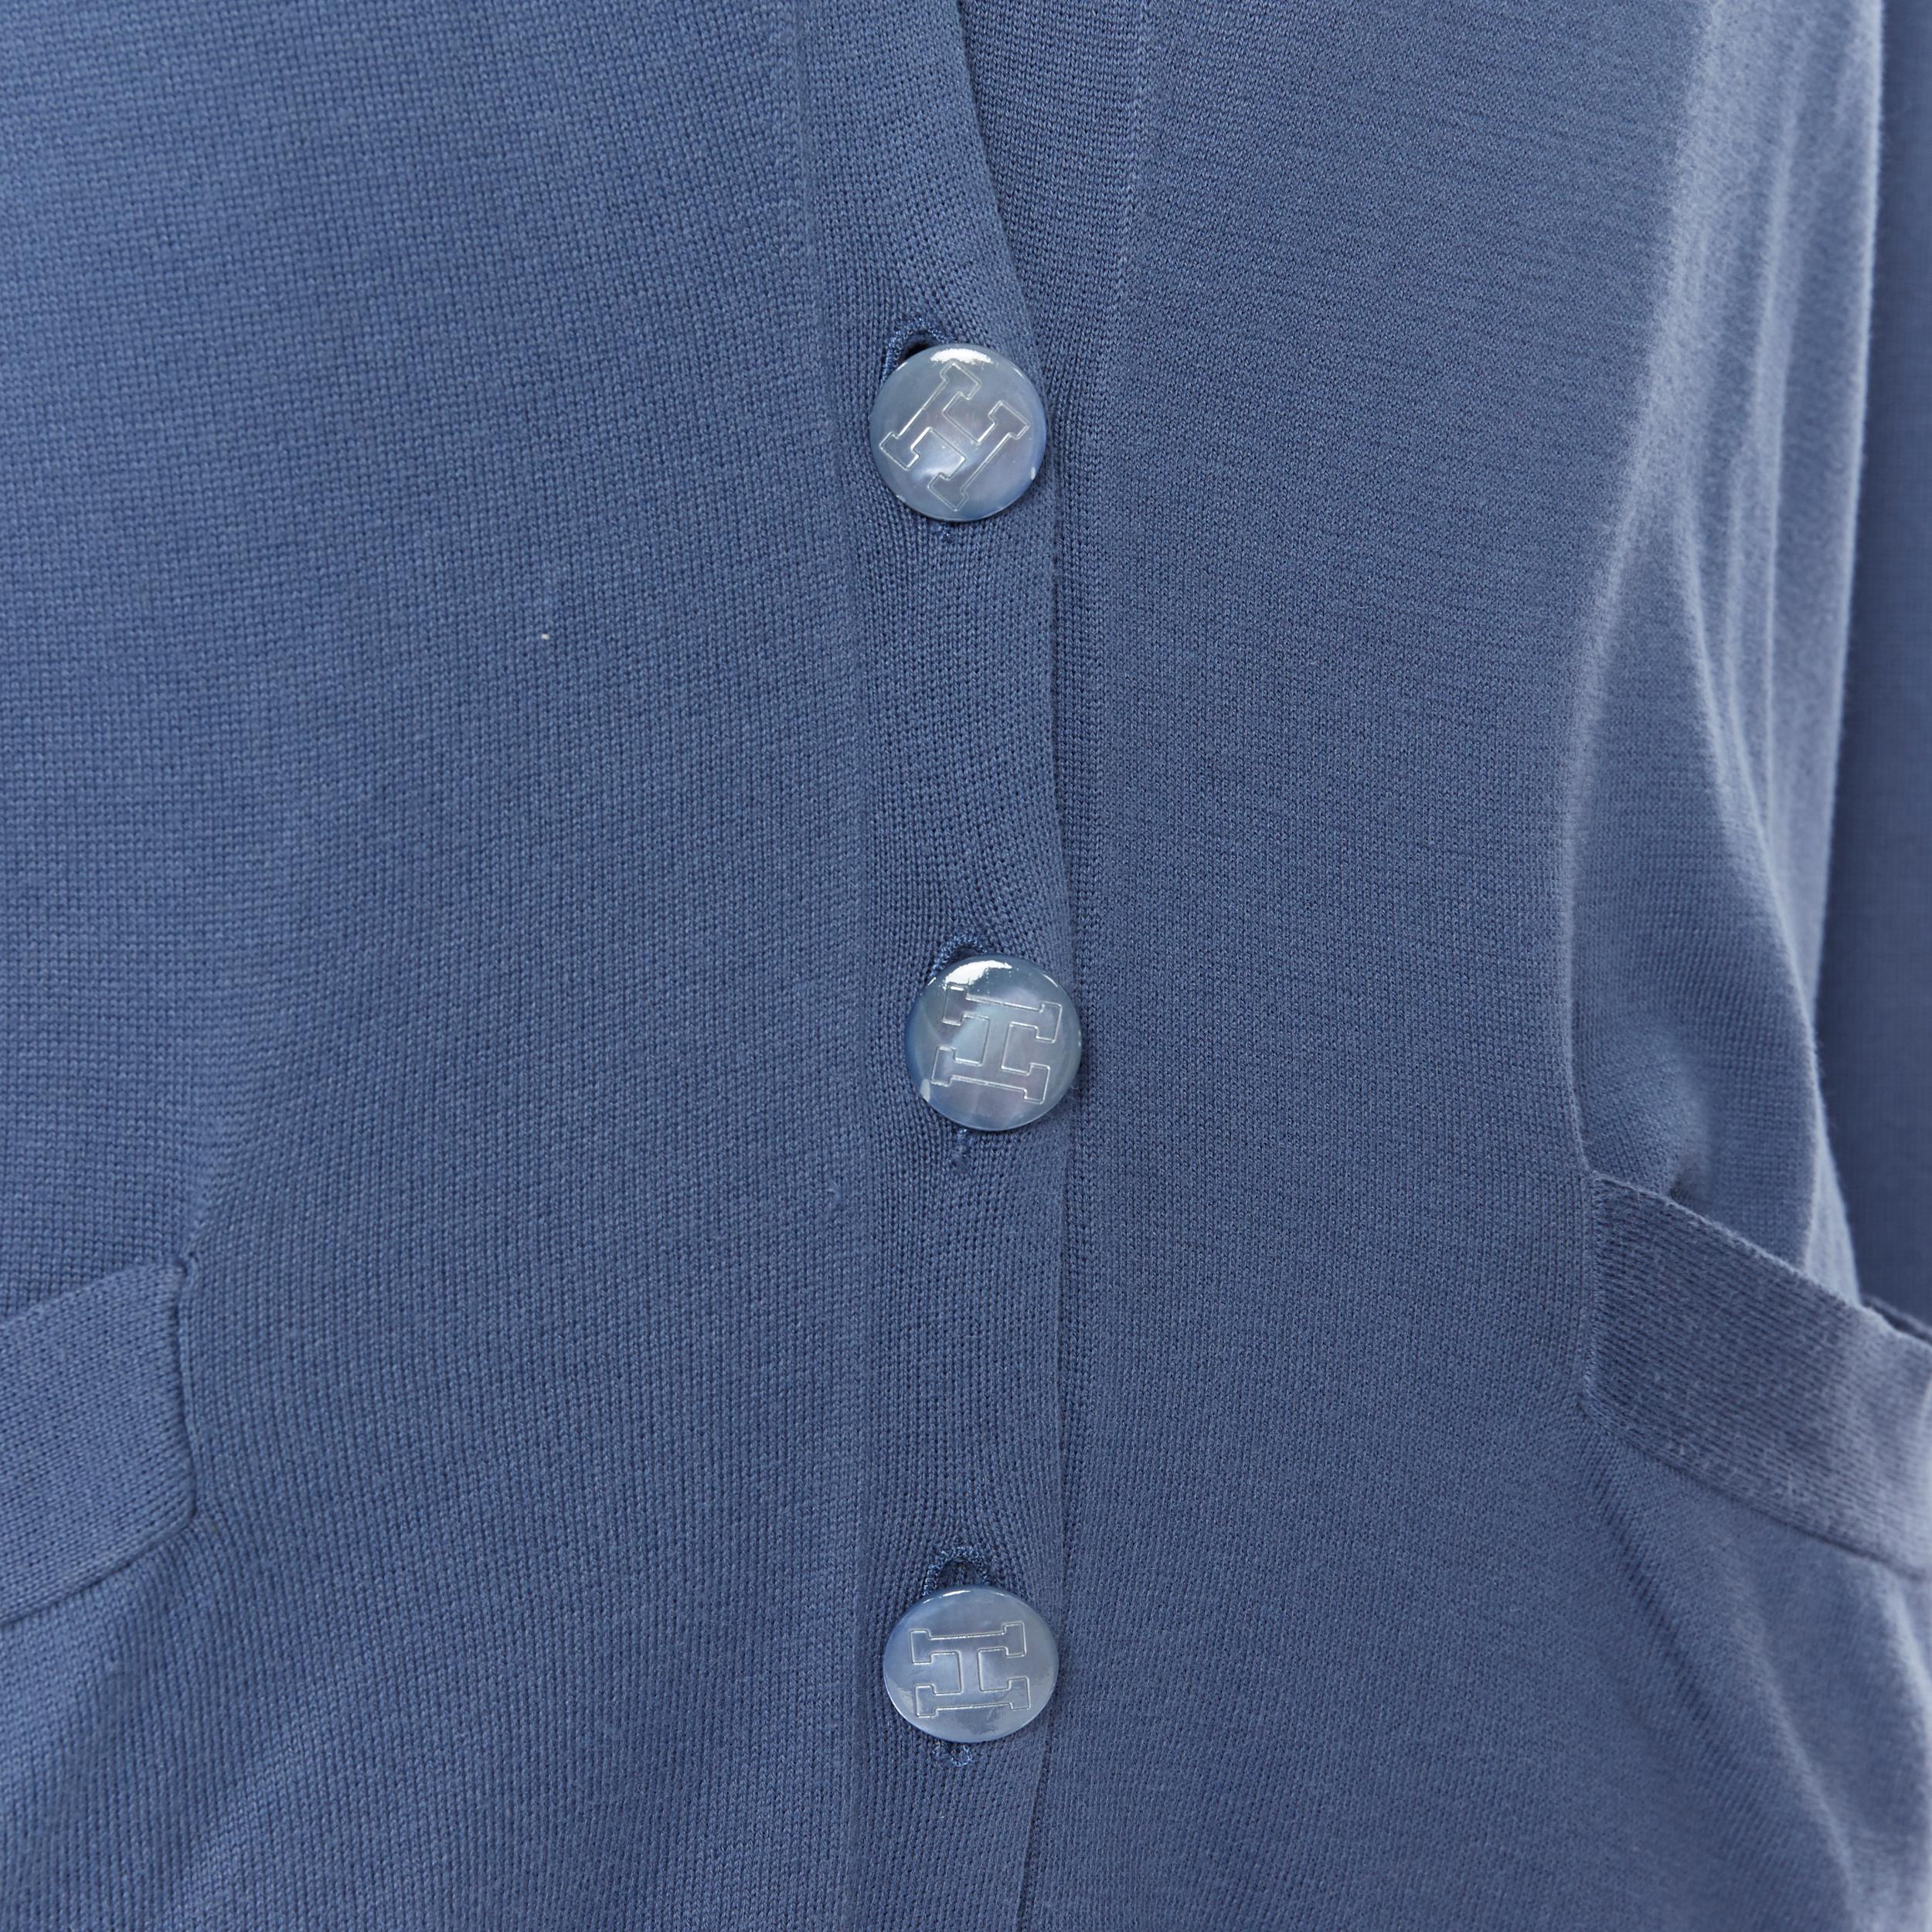 HERMES 100% cotton blue H mother of pearl button dual pocket cardigan sweater XS
Brand: Hermes
Model Name / Style: Cotton cardigan
Material: Cotton
Color: Blue
Pattern: Solid
Closure: Button
Extra Detail: H etched mother of pearl bttons. Dual front